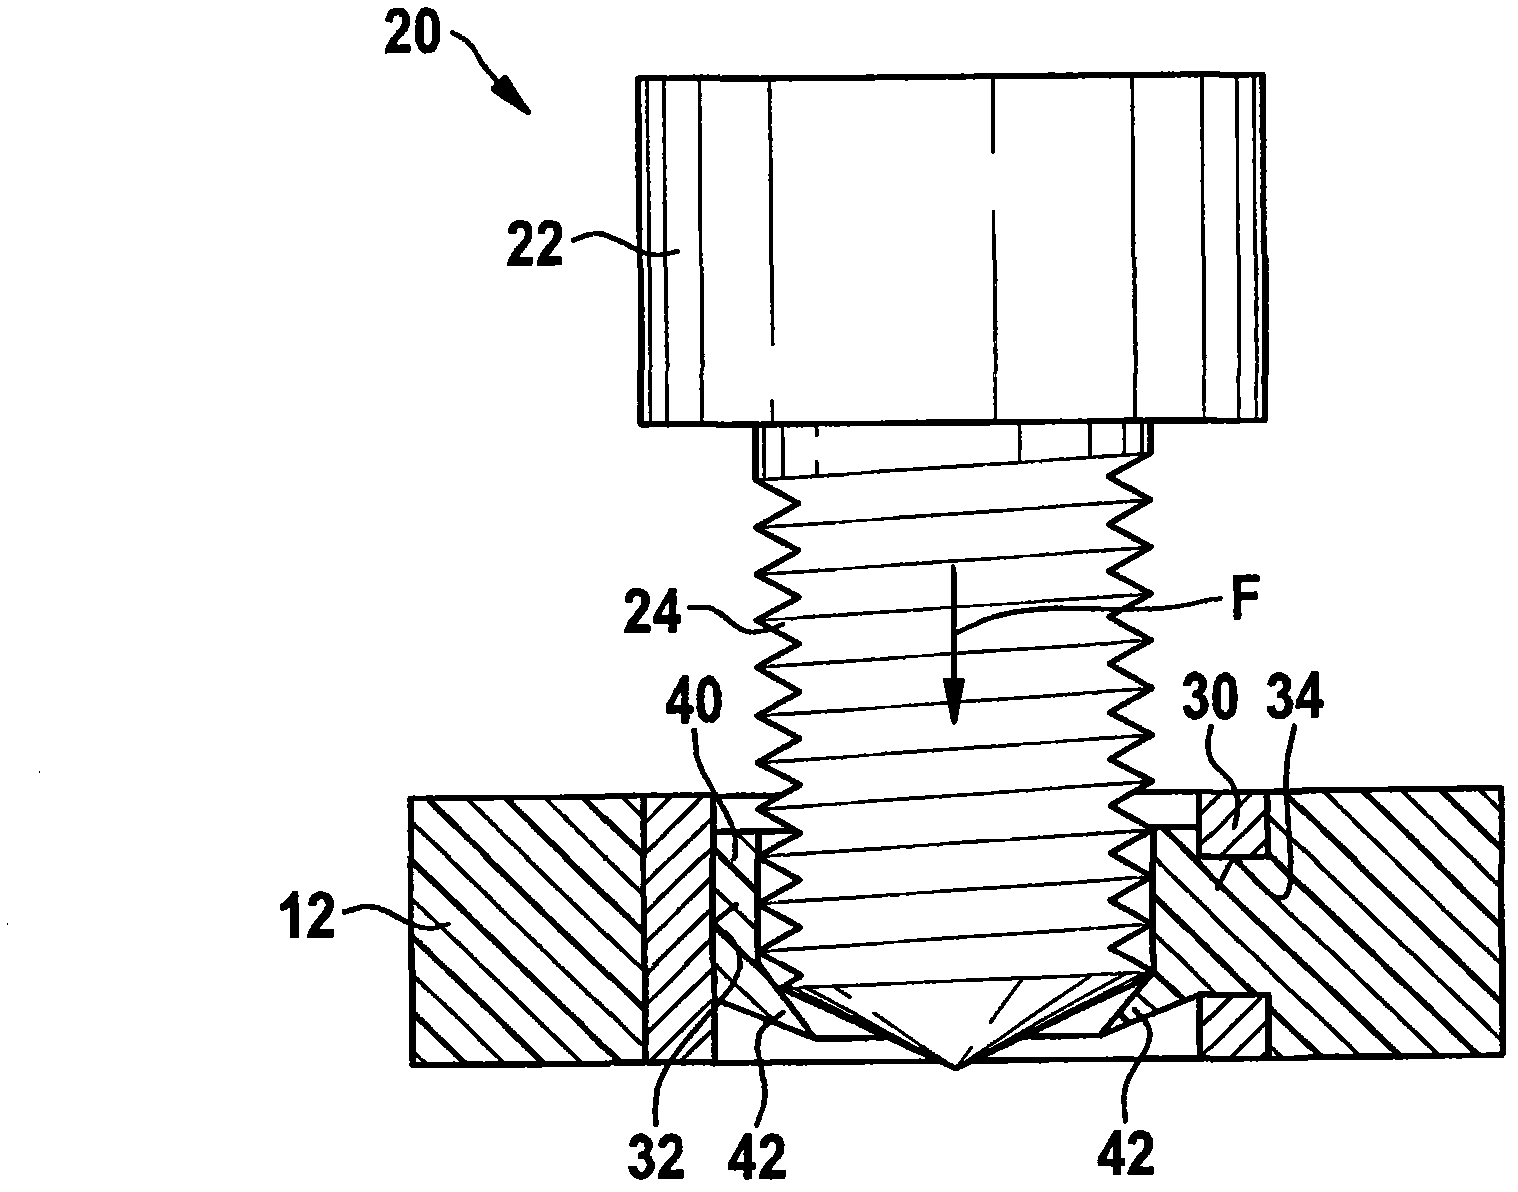 Structure of a build-in screw in a bushing and corresponding sensor housing